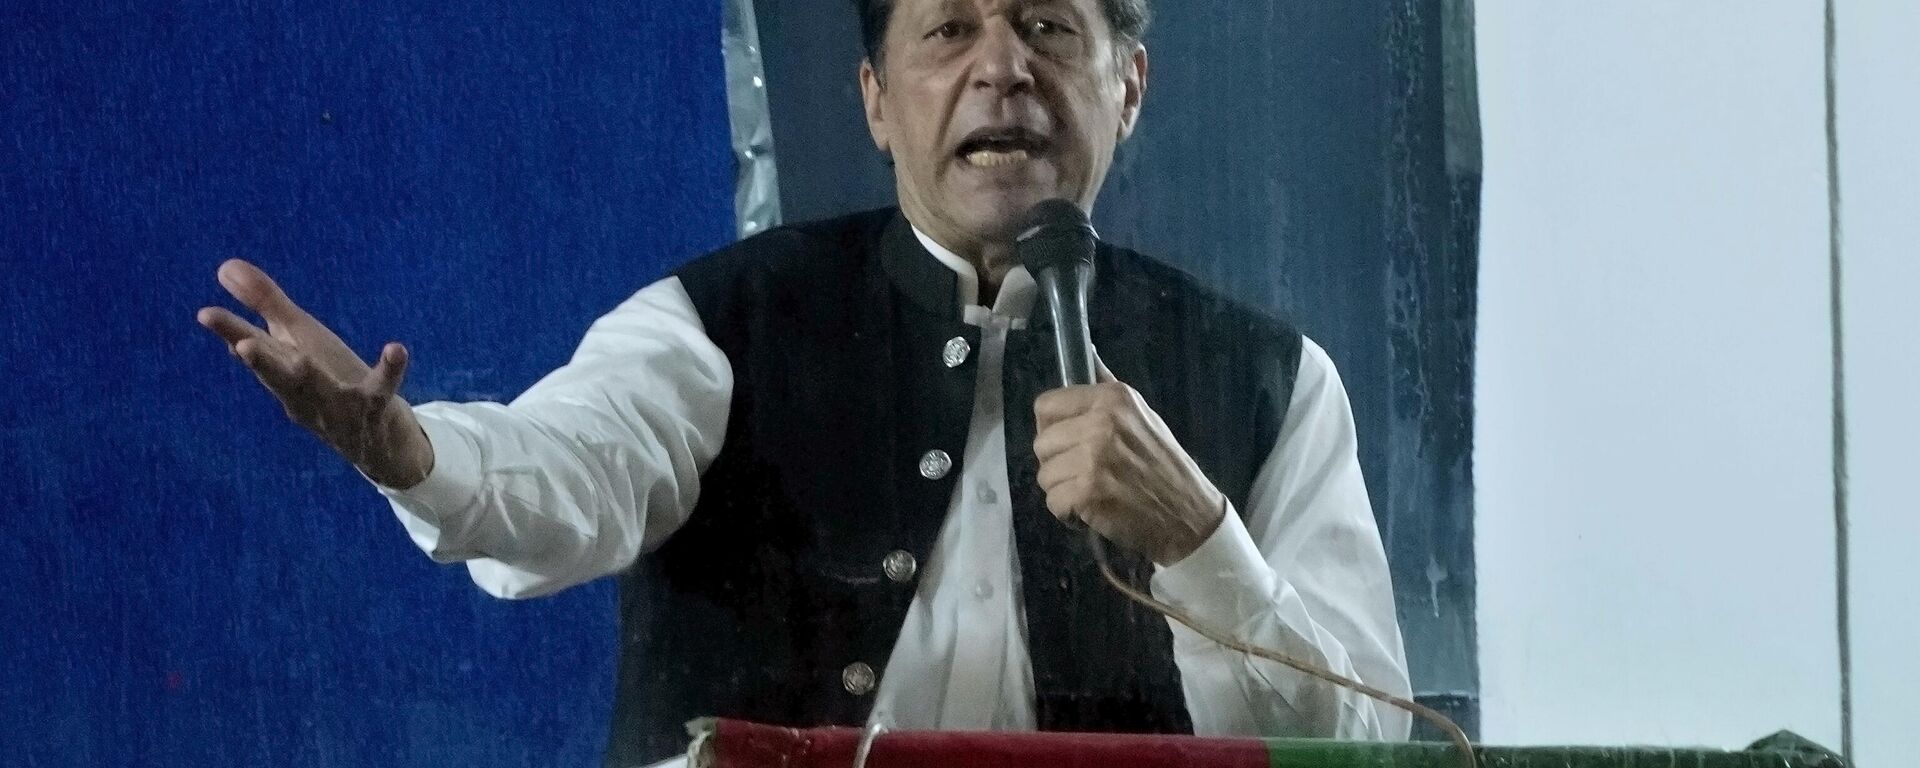 Protected by a bulletproof barrier, former Prime Minister Imran Khan speaks during a rally in Lahore, Pakistan, Sunday, March 26, 2023, to pressure the government of Shahbaz Sharif to agree to hold snap elections. - Sputnik India, 1920, 27.03.2023